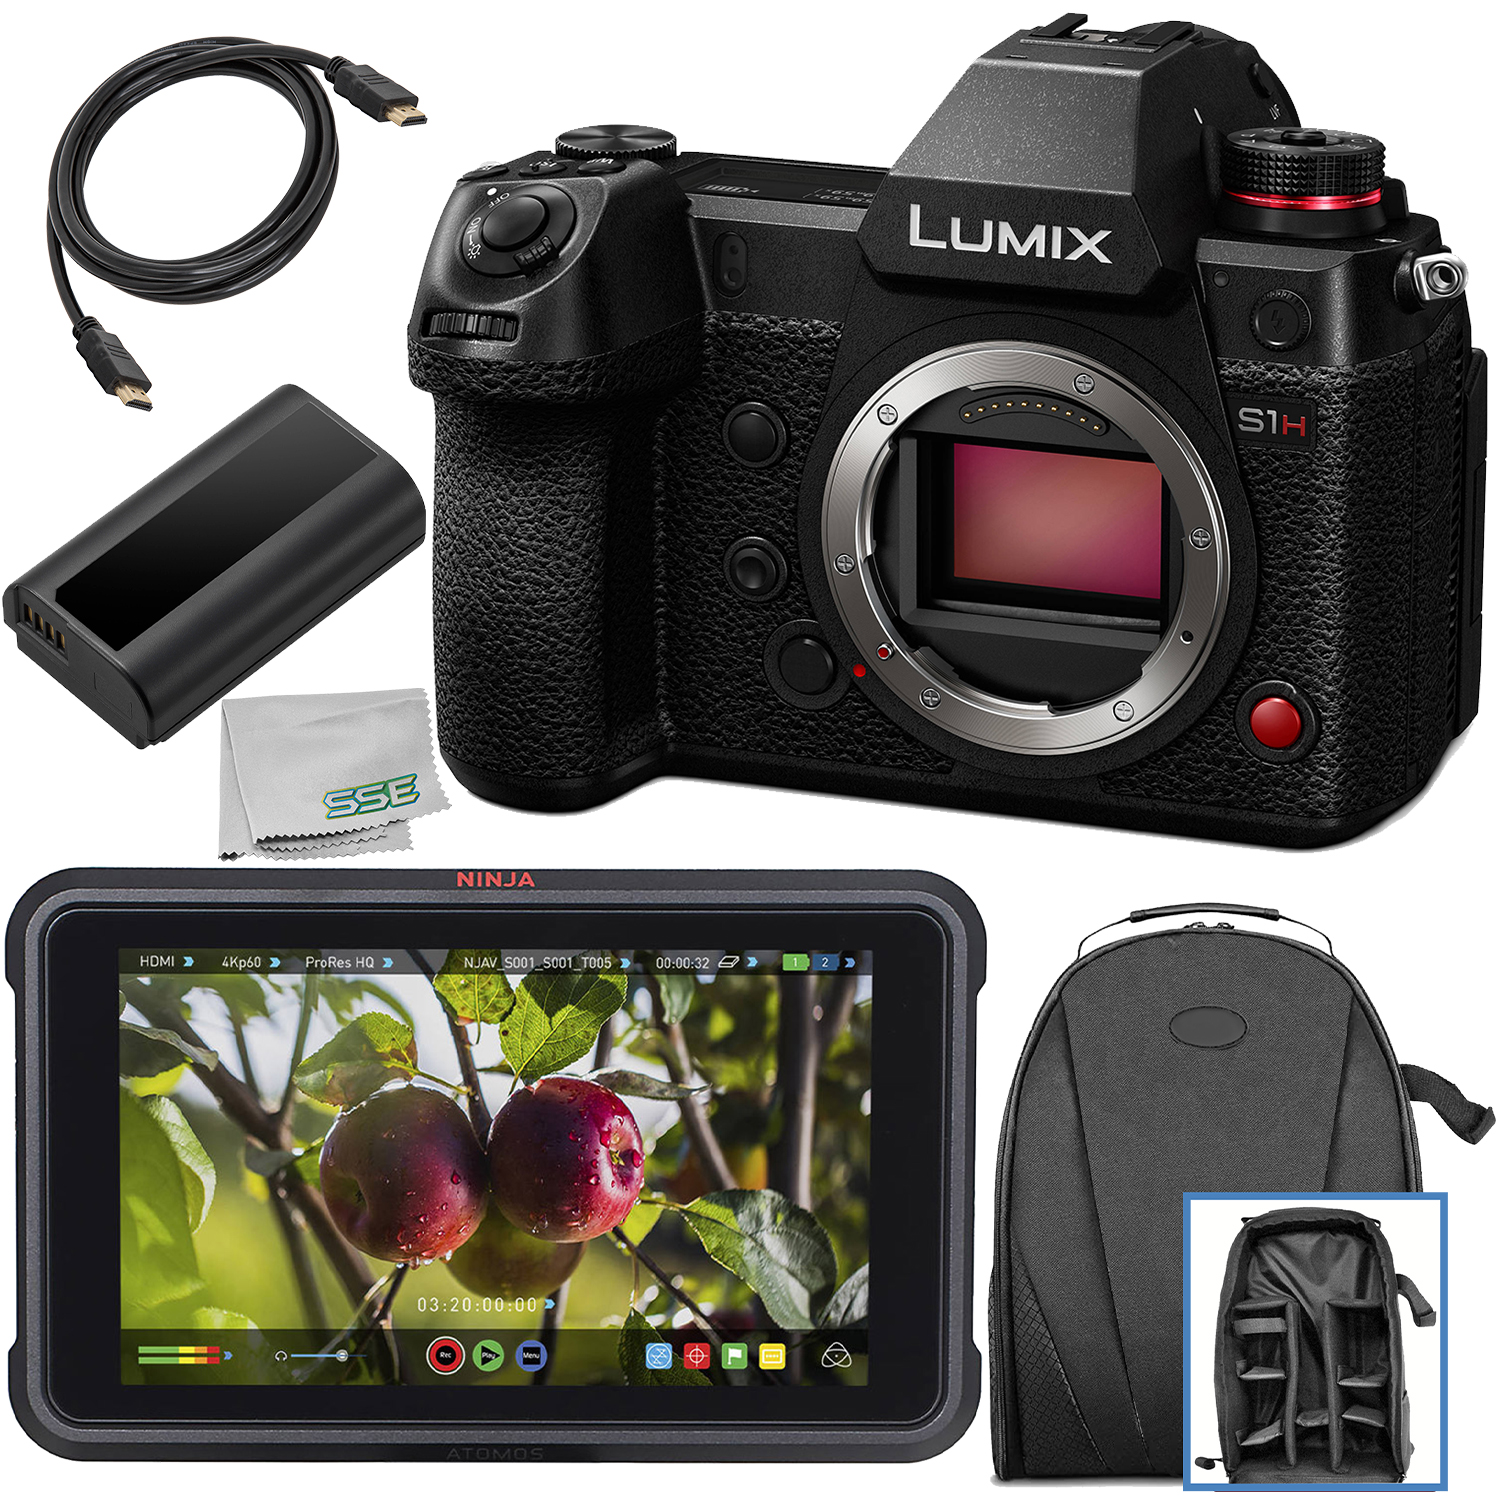 Panasonic Lumix DC-S1H Mirrorless Digital Camera (Body Only) with Atomos Ninja V 5" 4K HDMI Recording Monitor & Essential Bundle - Includes: Water Resistant Backpack, 1x Replacement Battery & More - image 1 of 7